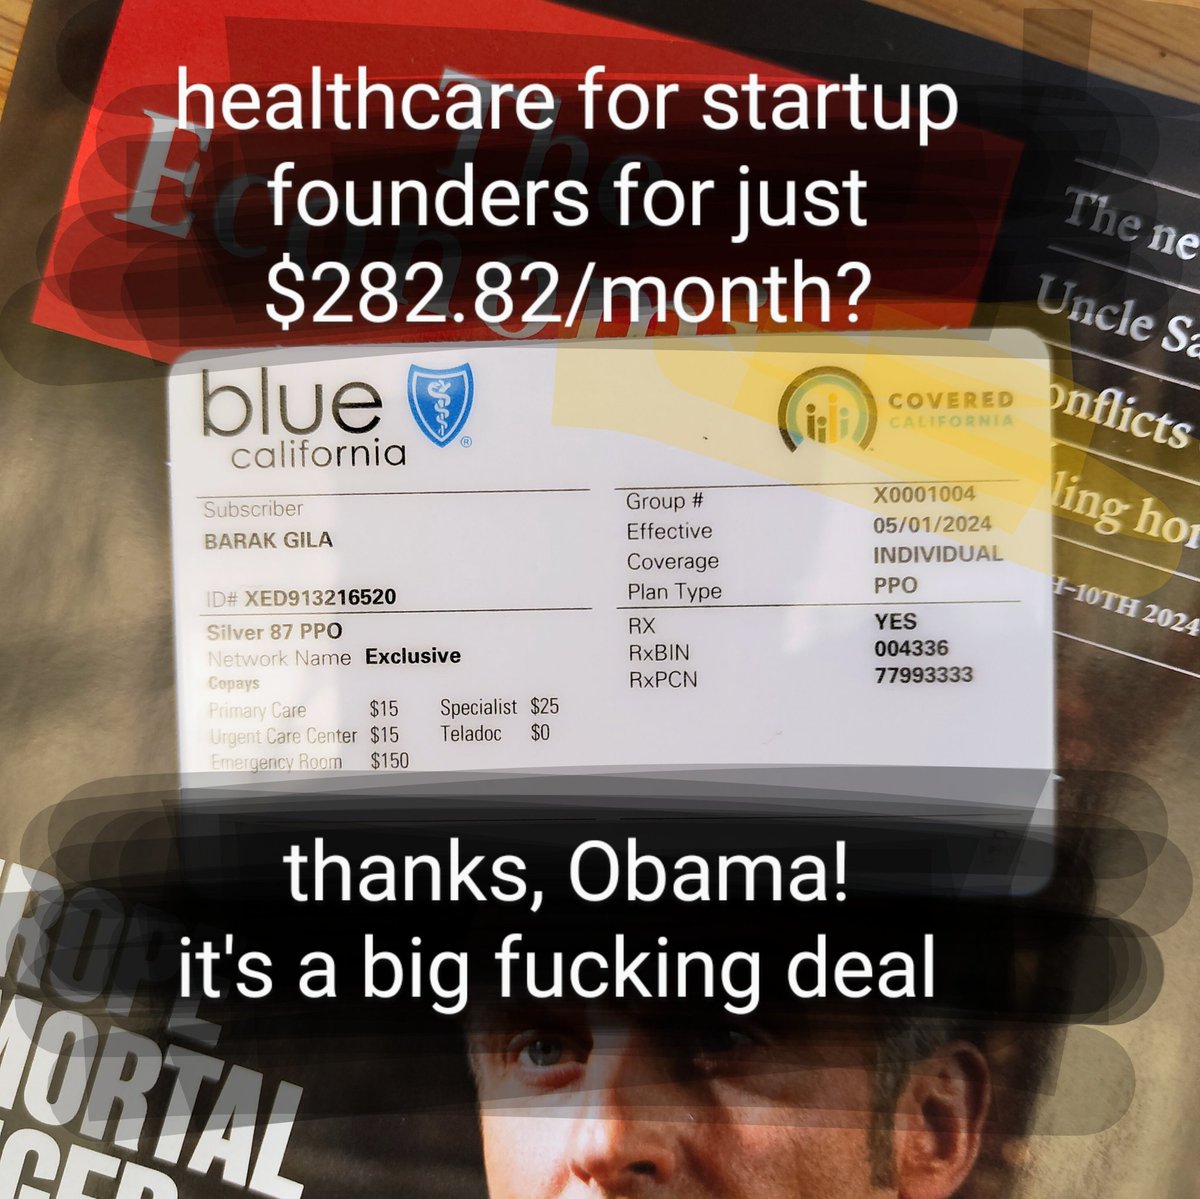 when my income went to $20k/year, I got $500 off my healthcare on @CoveredCA. No cap! That's #Bidenomics for entrepreneurs, and it's still a big fucking deal.